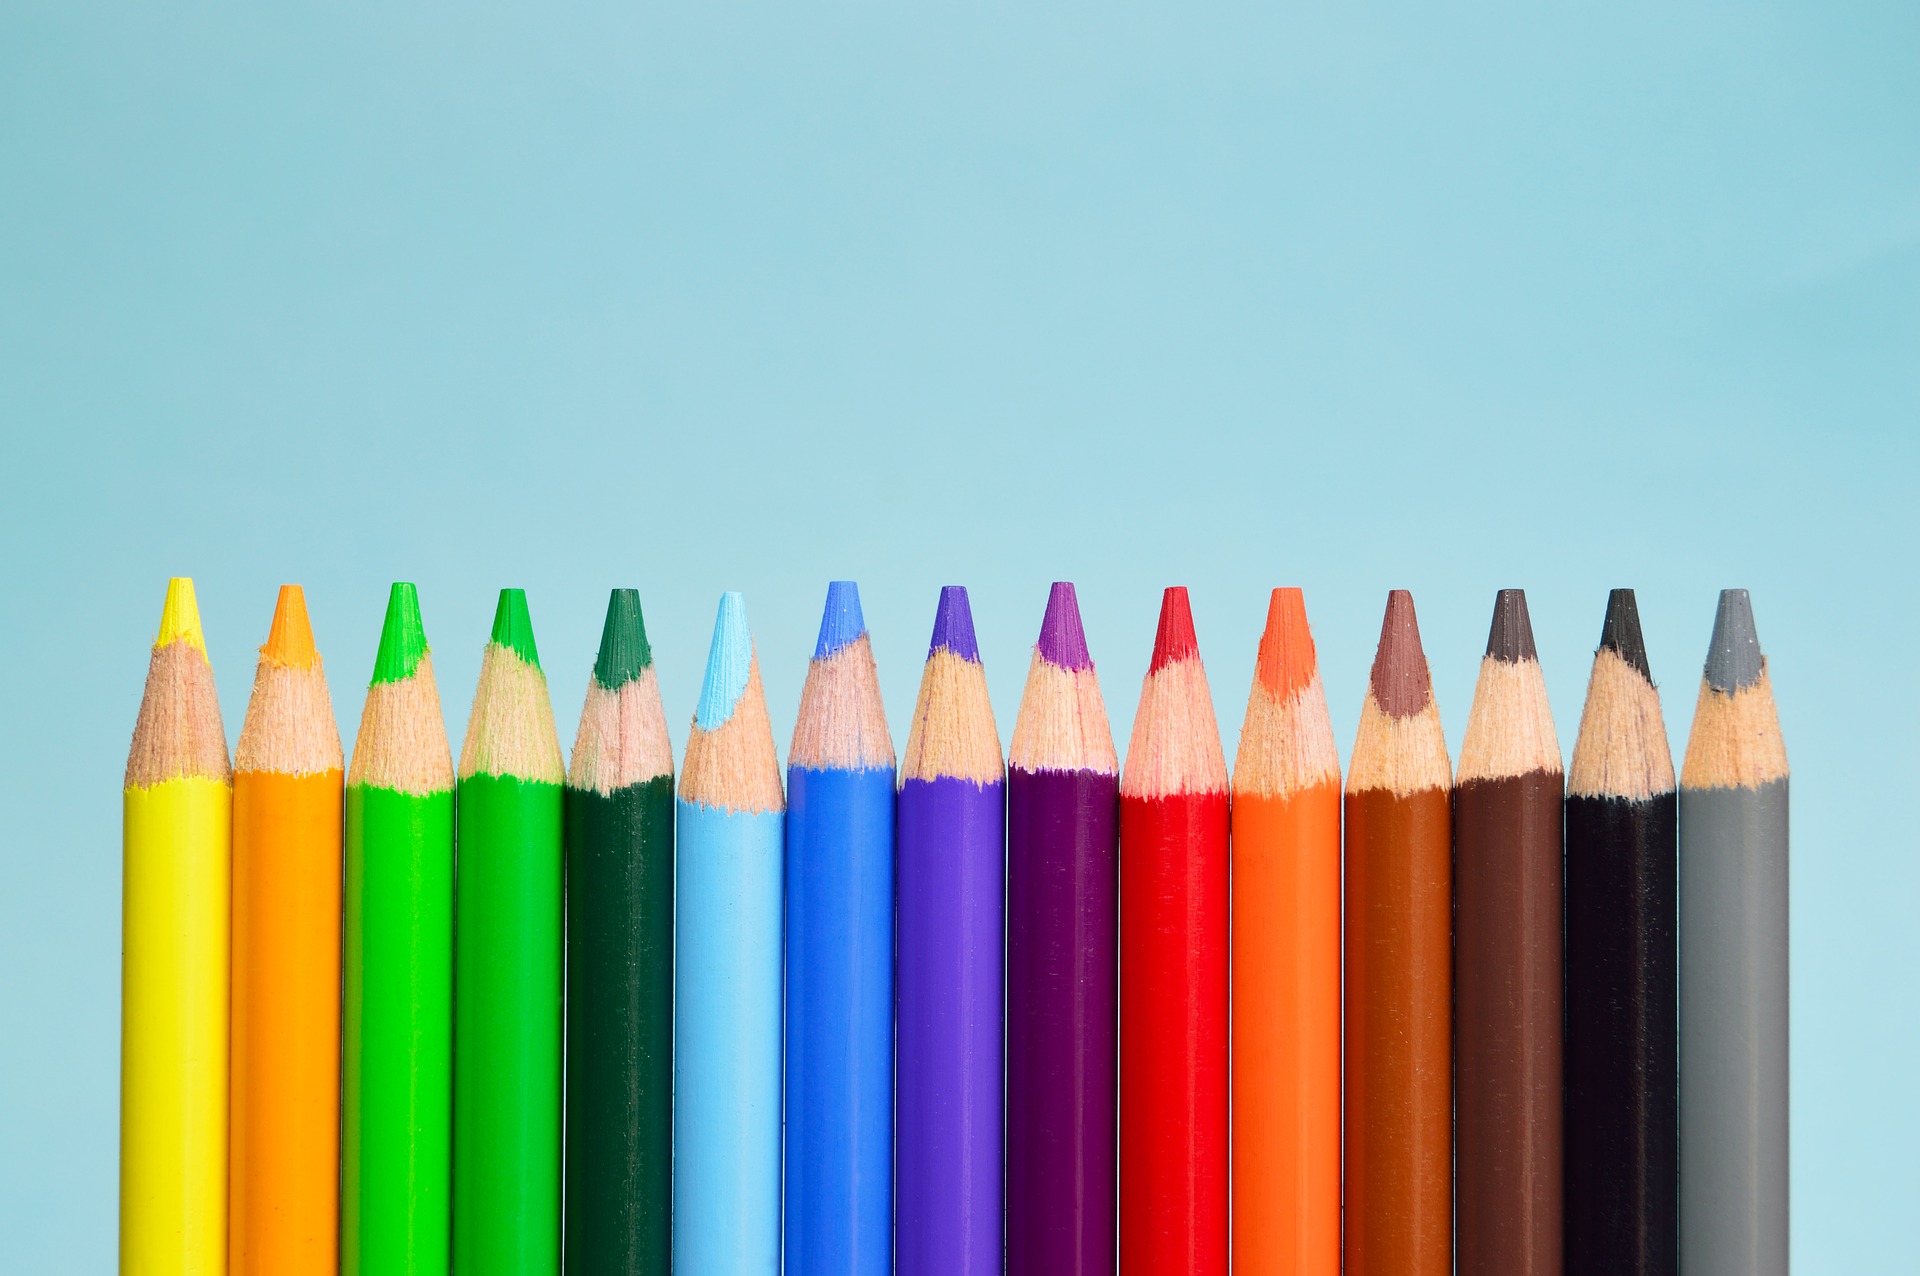 15 colored pencils stand upright spanning the color spectrum from yellow to green to blue to indigo to red to orange to brown to gray.